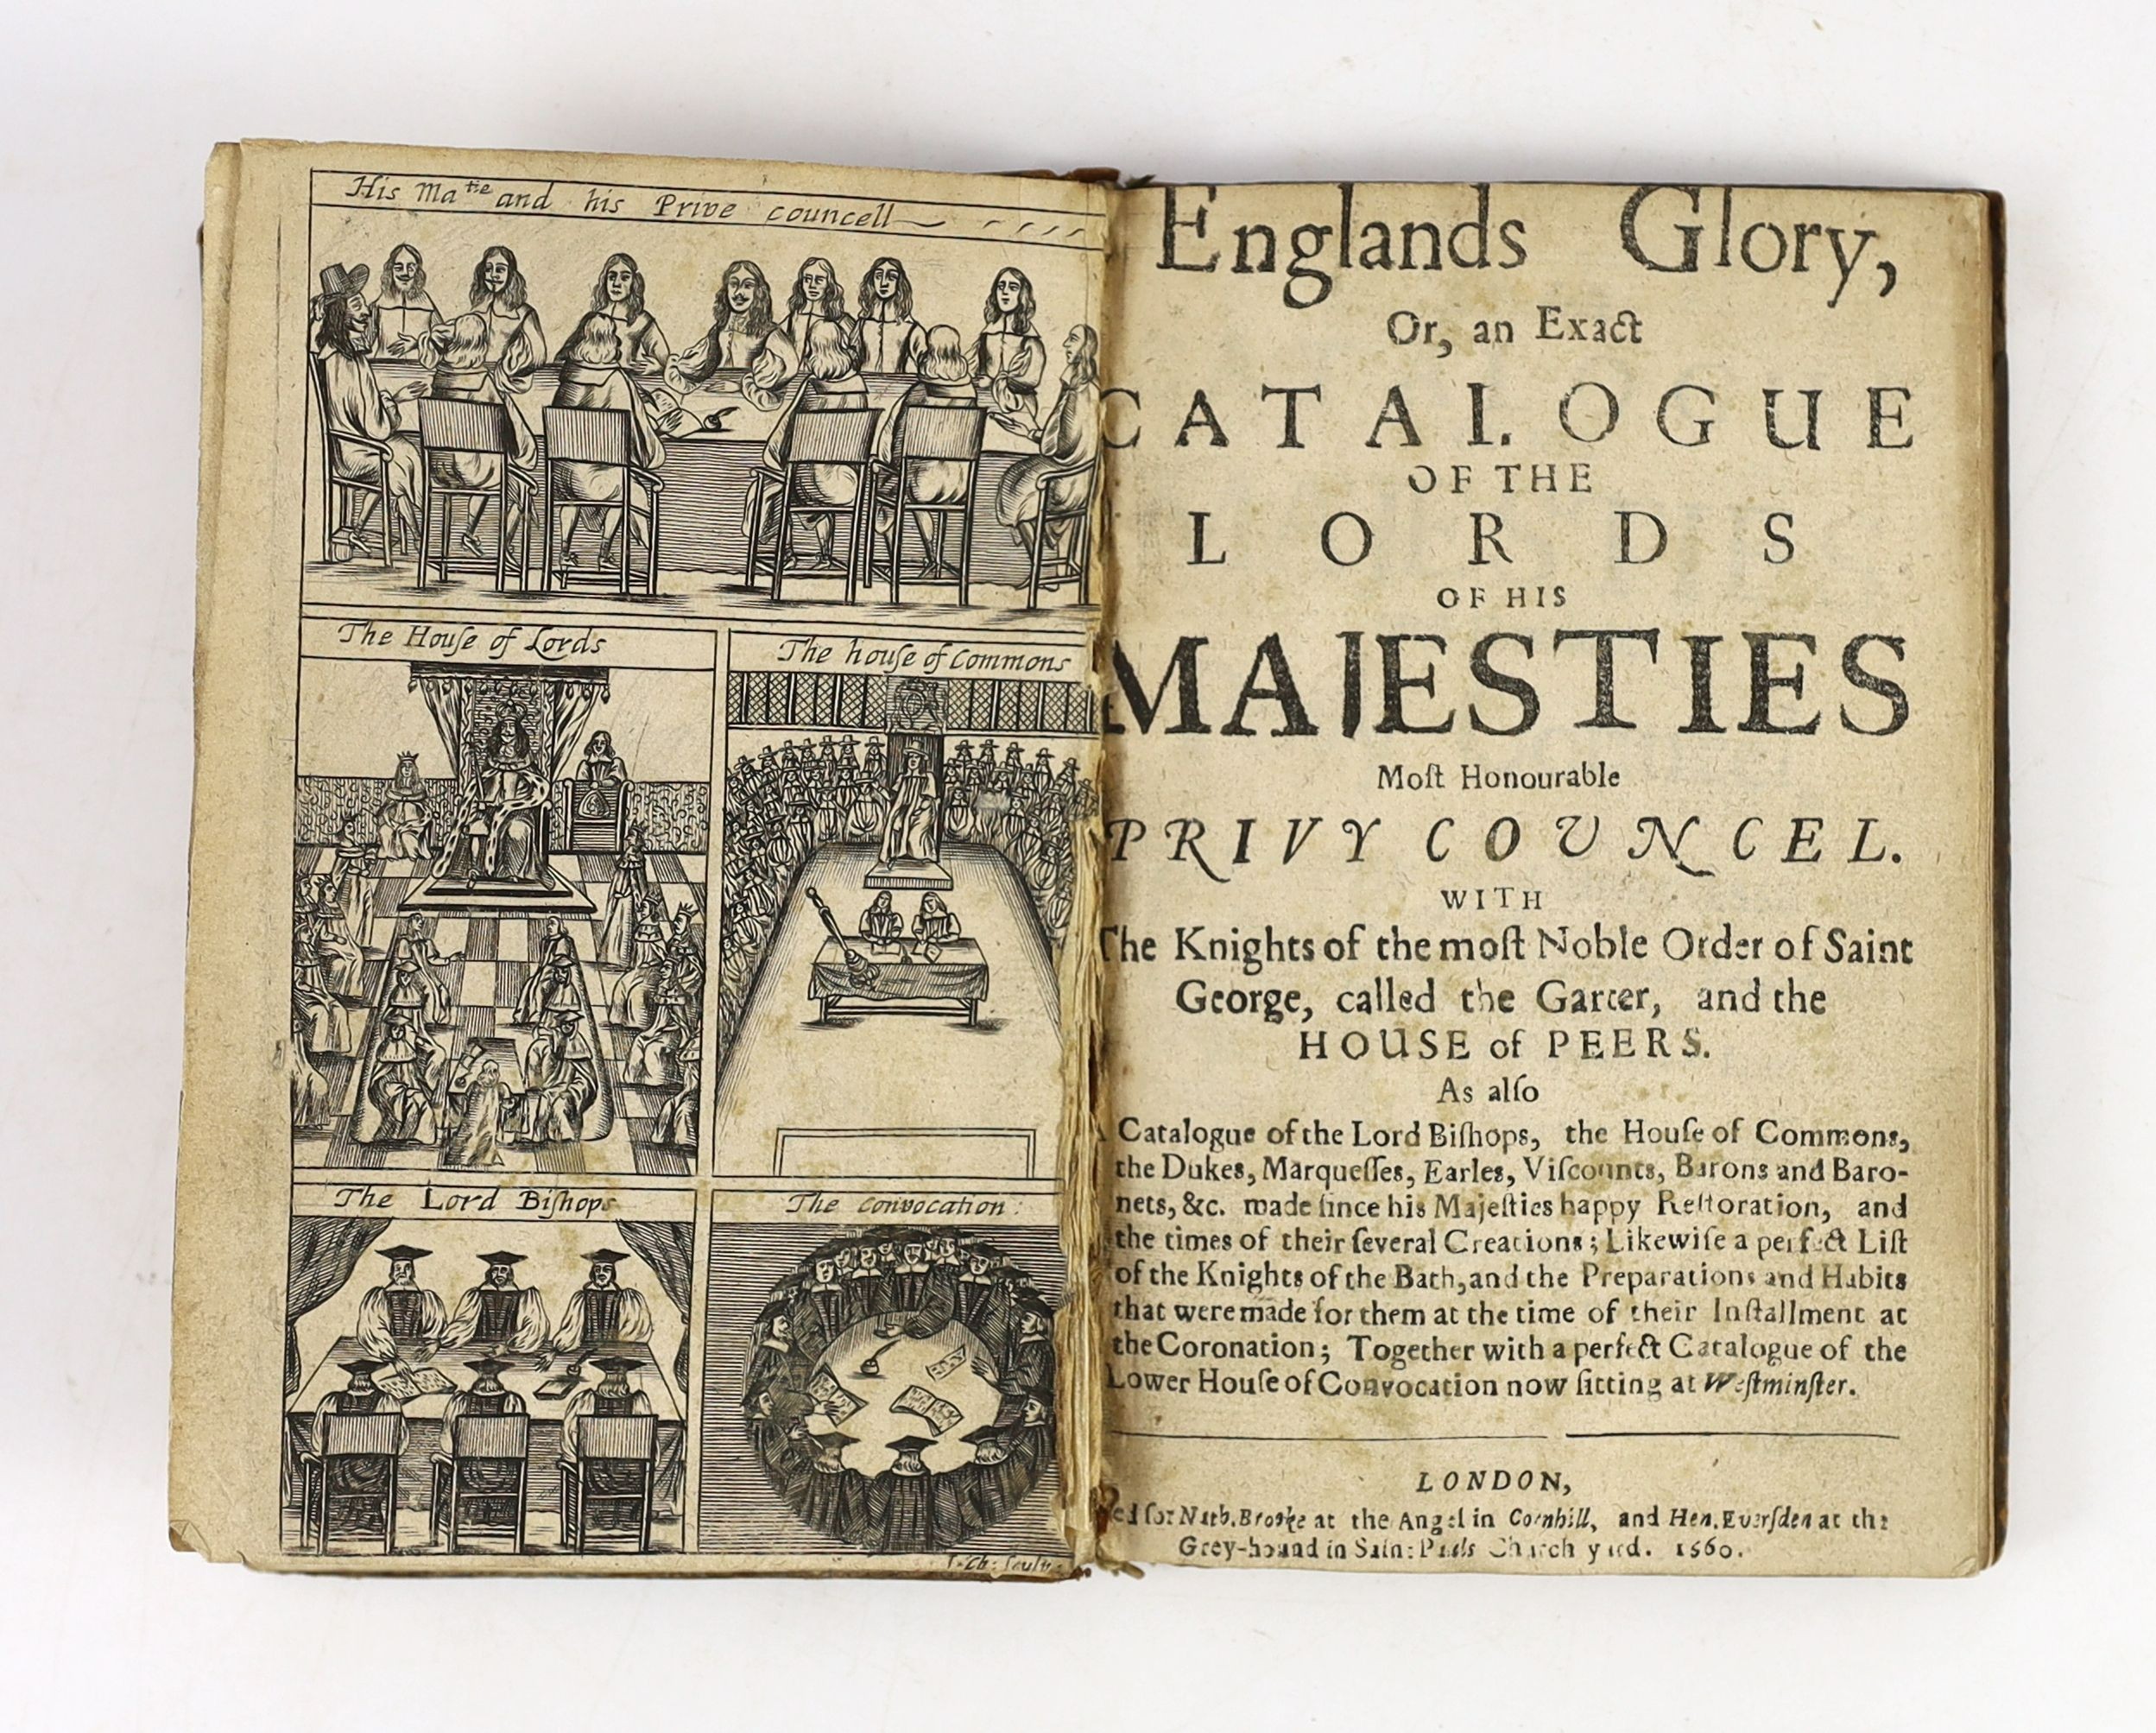 Restoration - Englands Glory, or, an Exact Catalogue of the Lords of his Majesties Most Honourable Privy Council, 12mo, speckled calf, with engraved frontispiece, 78pp, bookplate of John Smith de Burgh, Lord Dunkellin, 1